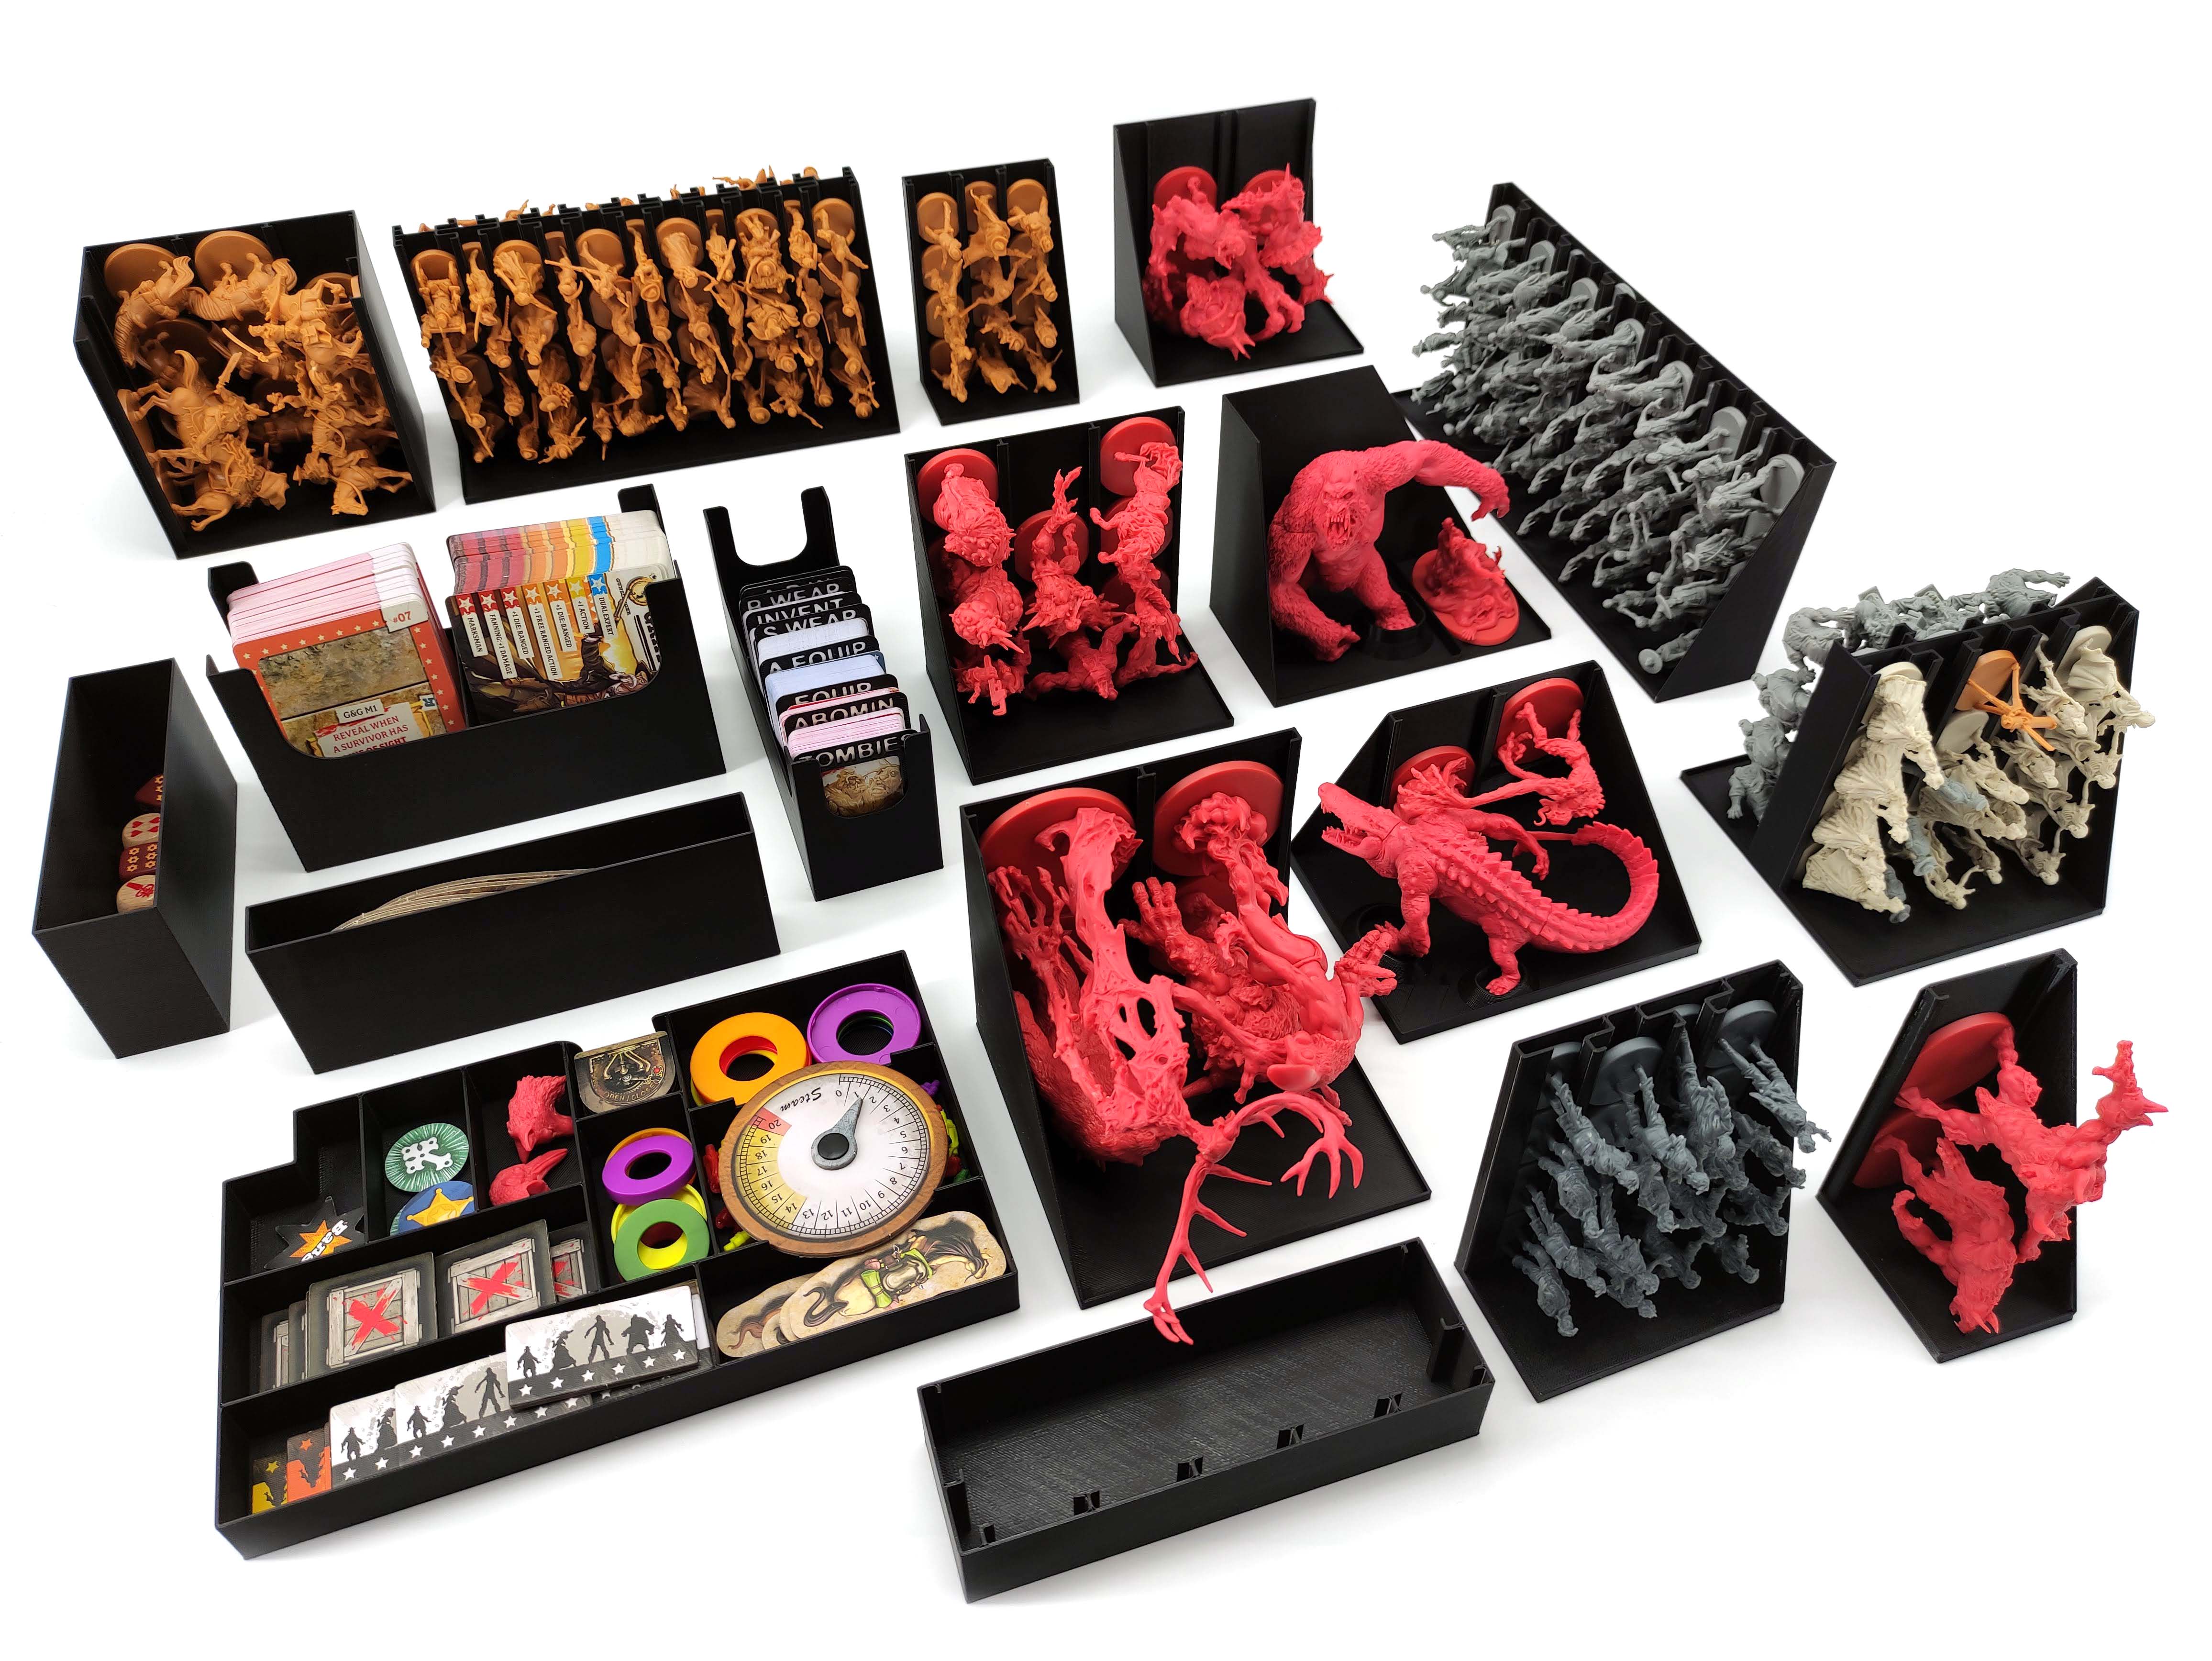 Zombicide: 2nd Edition - Board Game Insert - Tinkering Paws